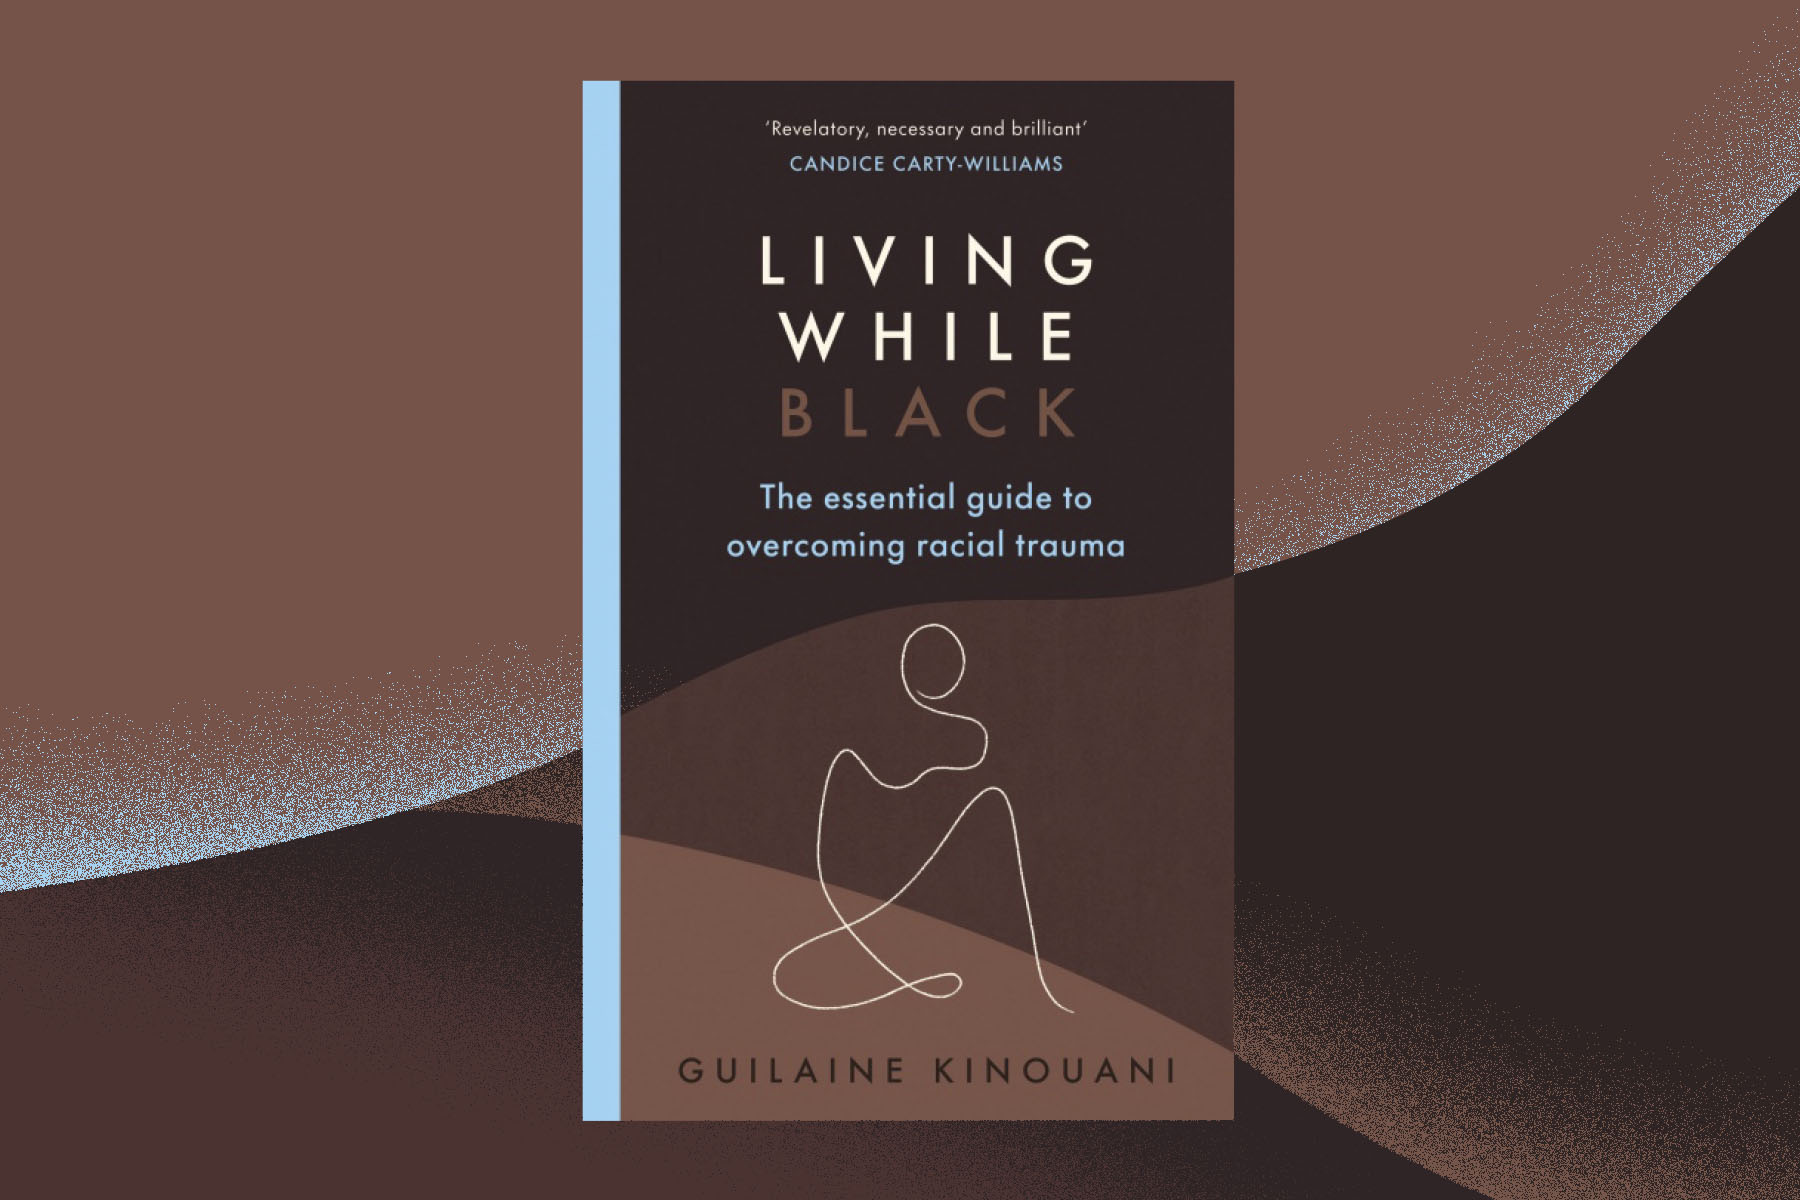 The book Living While Black by Guilaine Kinouani on a background that matches the book's brown and baby blue colour scheme.